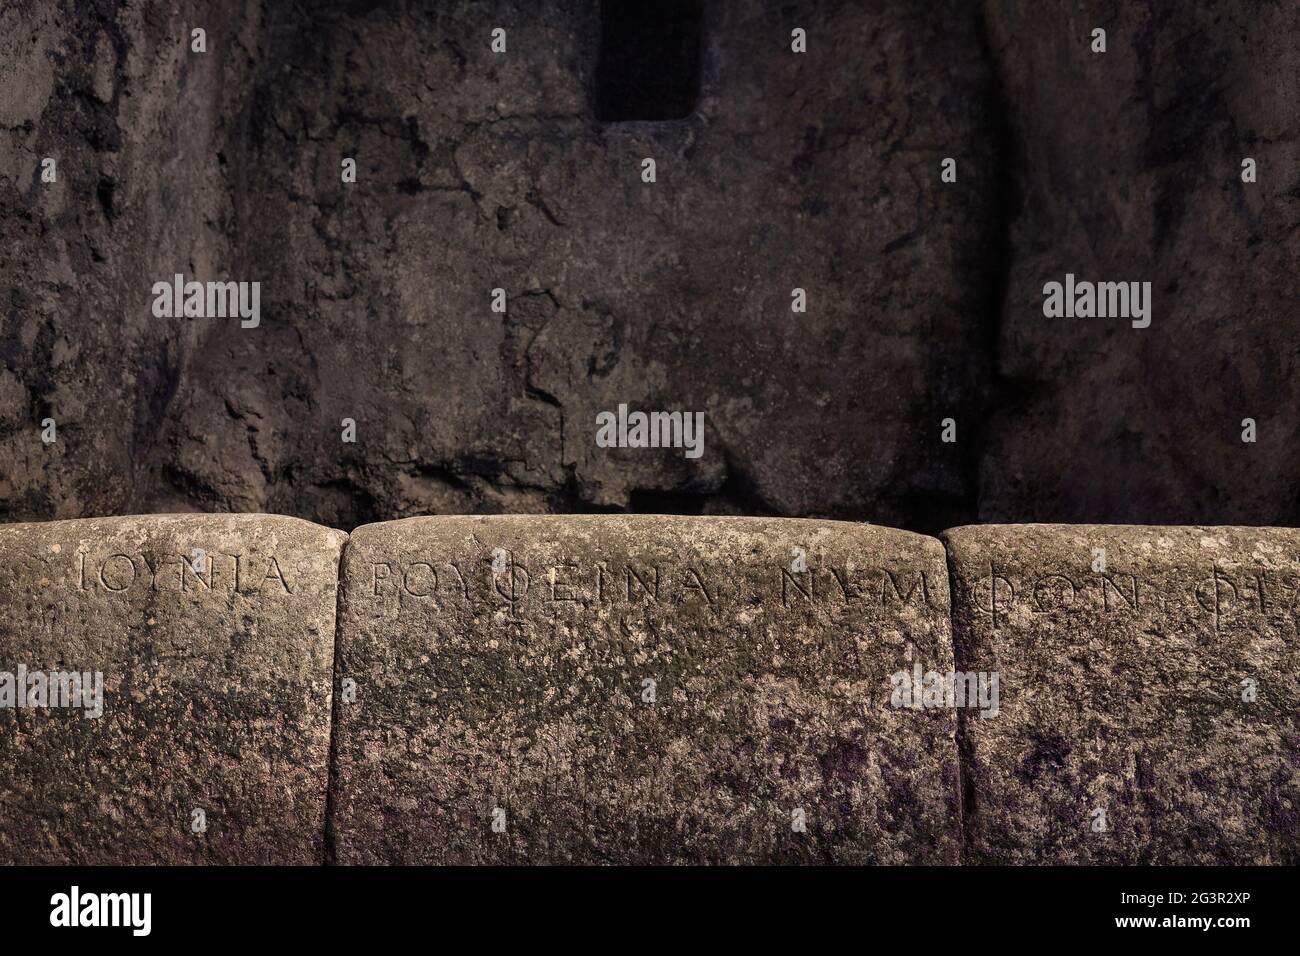 Ancient script engraved on the walls of the Butrint temple in Albania. Stock Photo